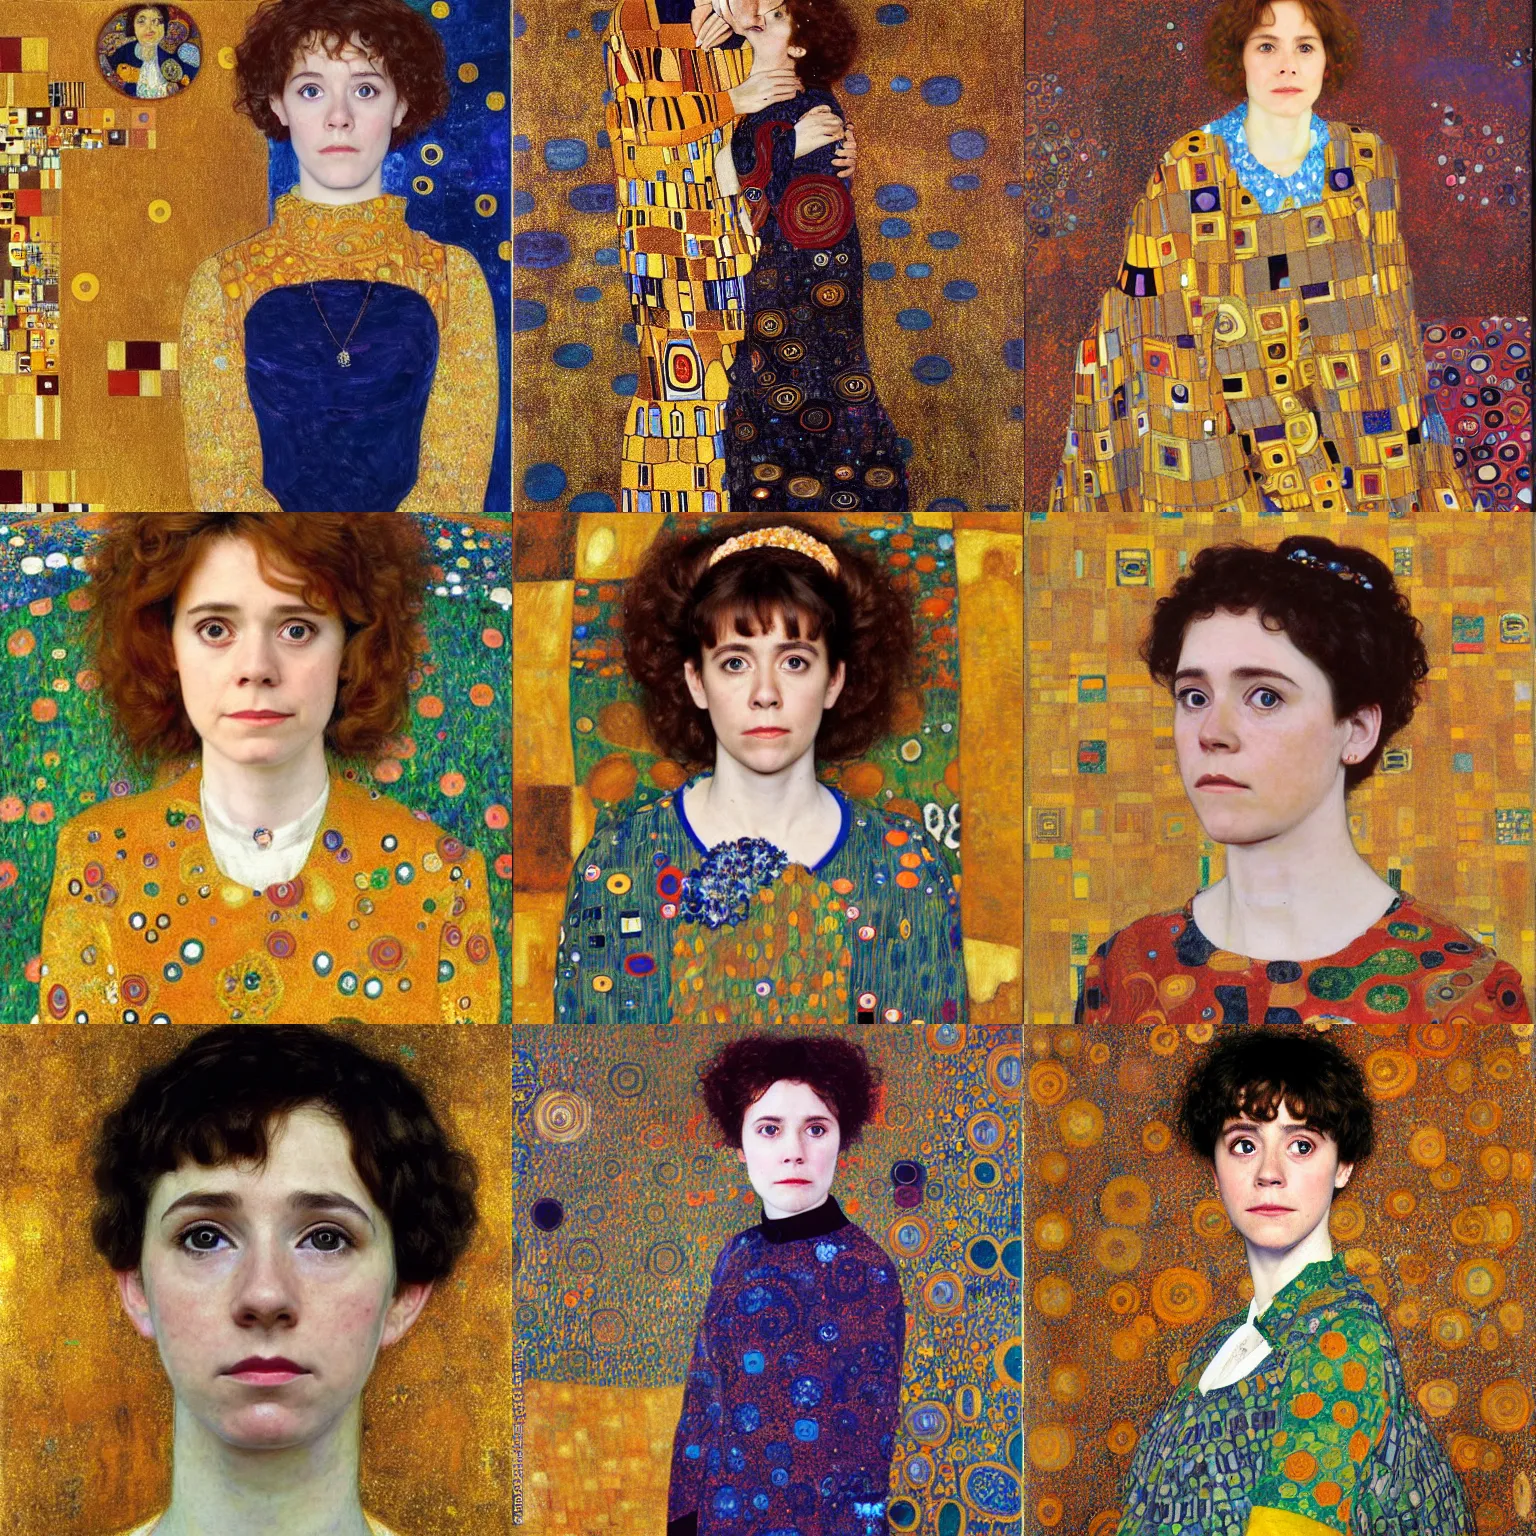 Prompt: a portrait of female asa Butterfield mixed with pam beesly by gustav klimt